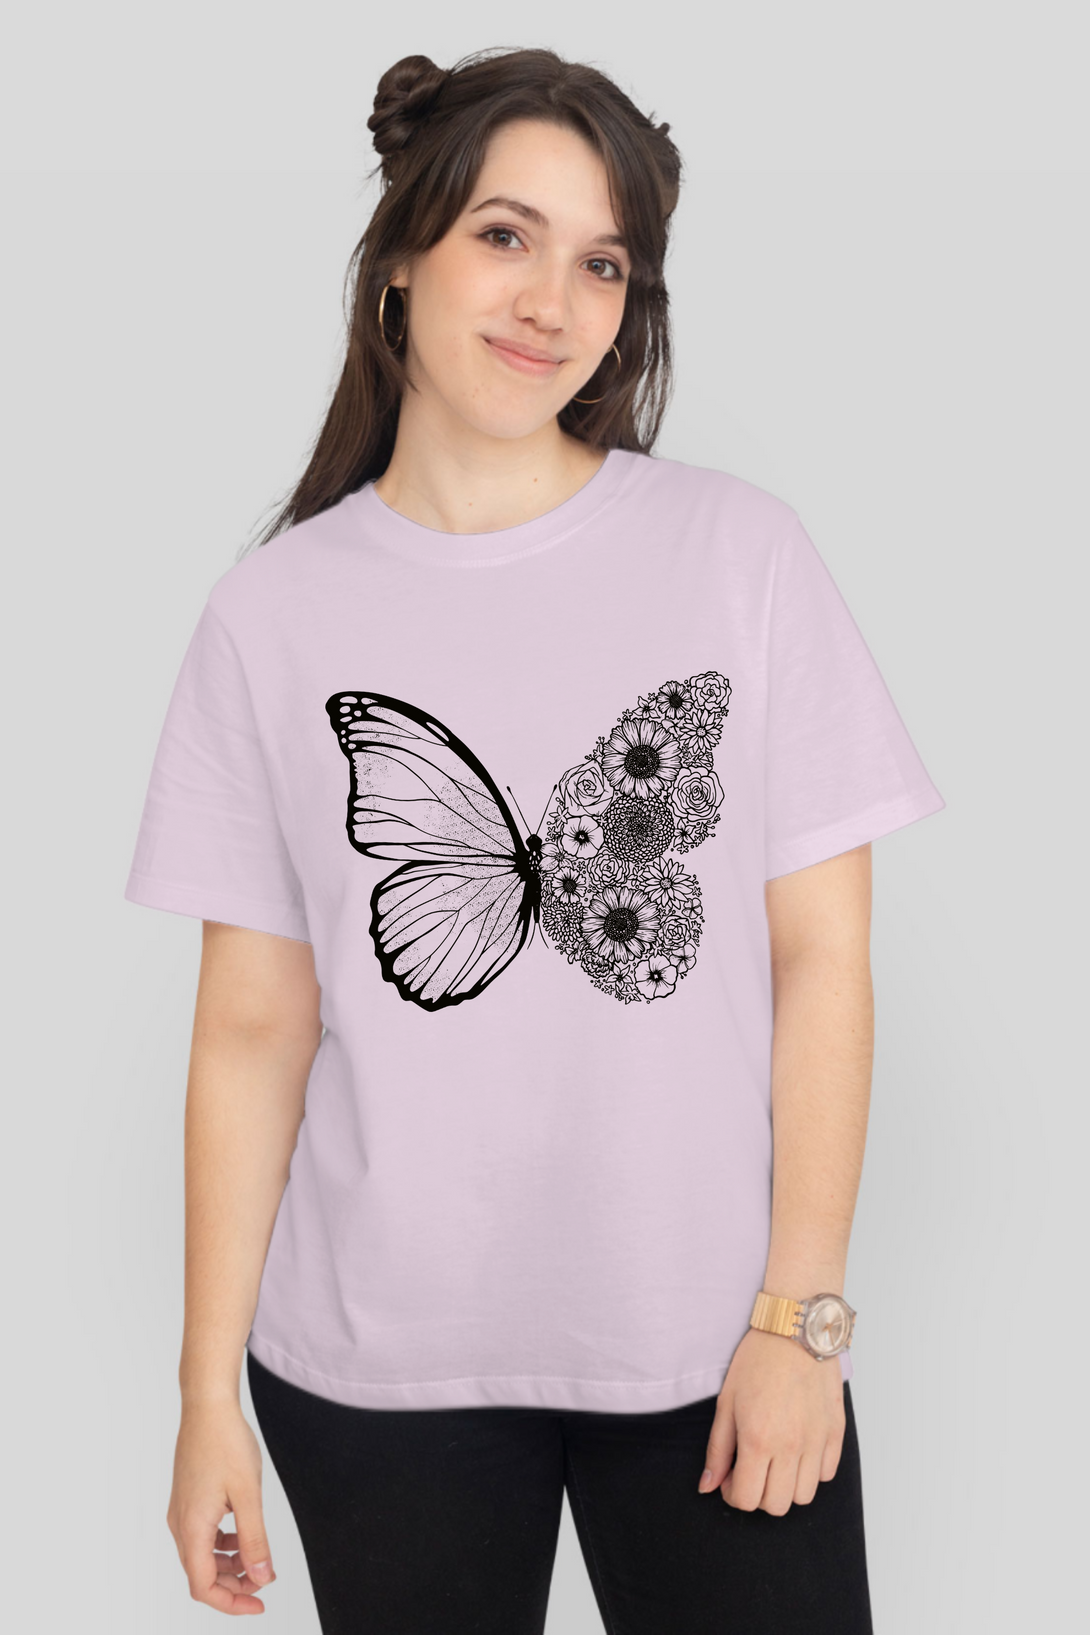 Floral Butterfly Printed T-Shirt For Women - WowWaves - 8